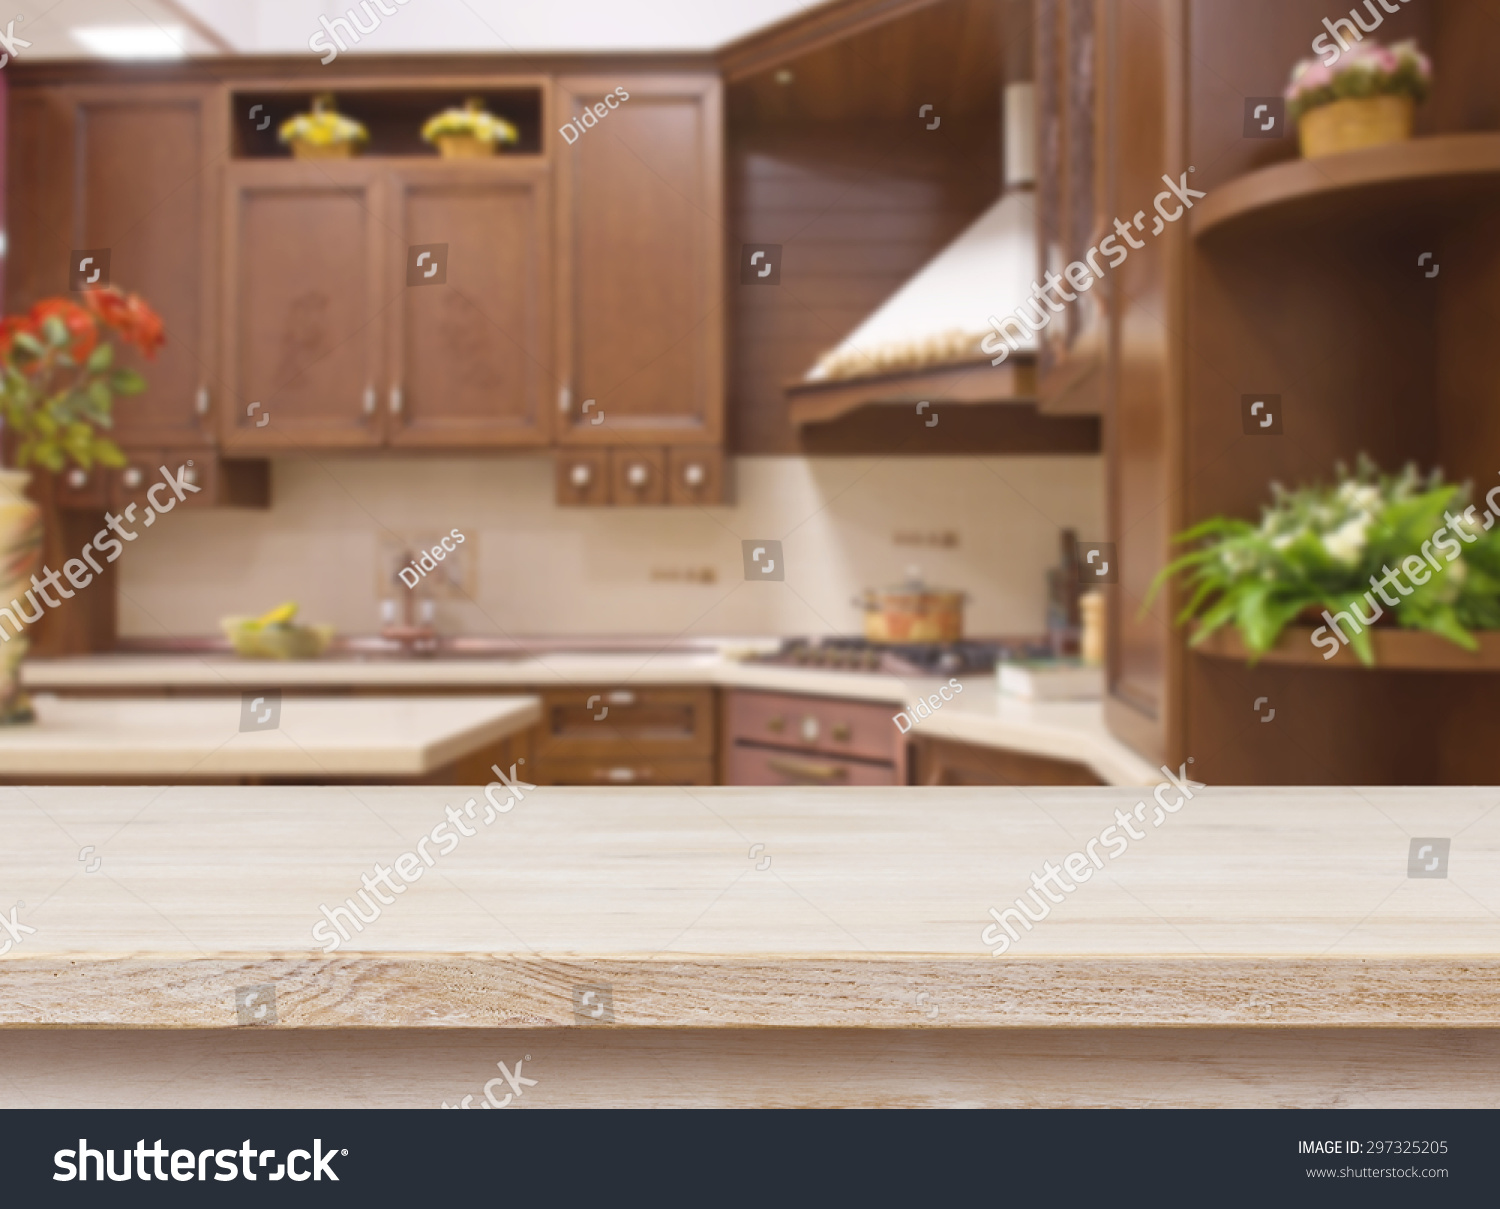 Dining Table On Blurred Brown Kitchen Stock Photo ...